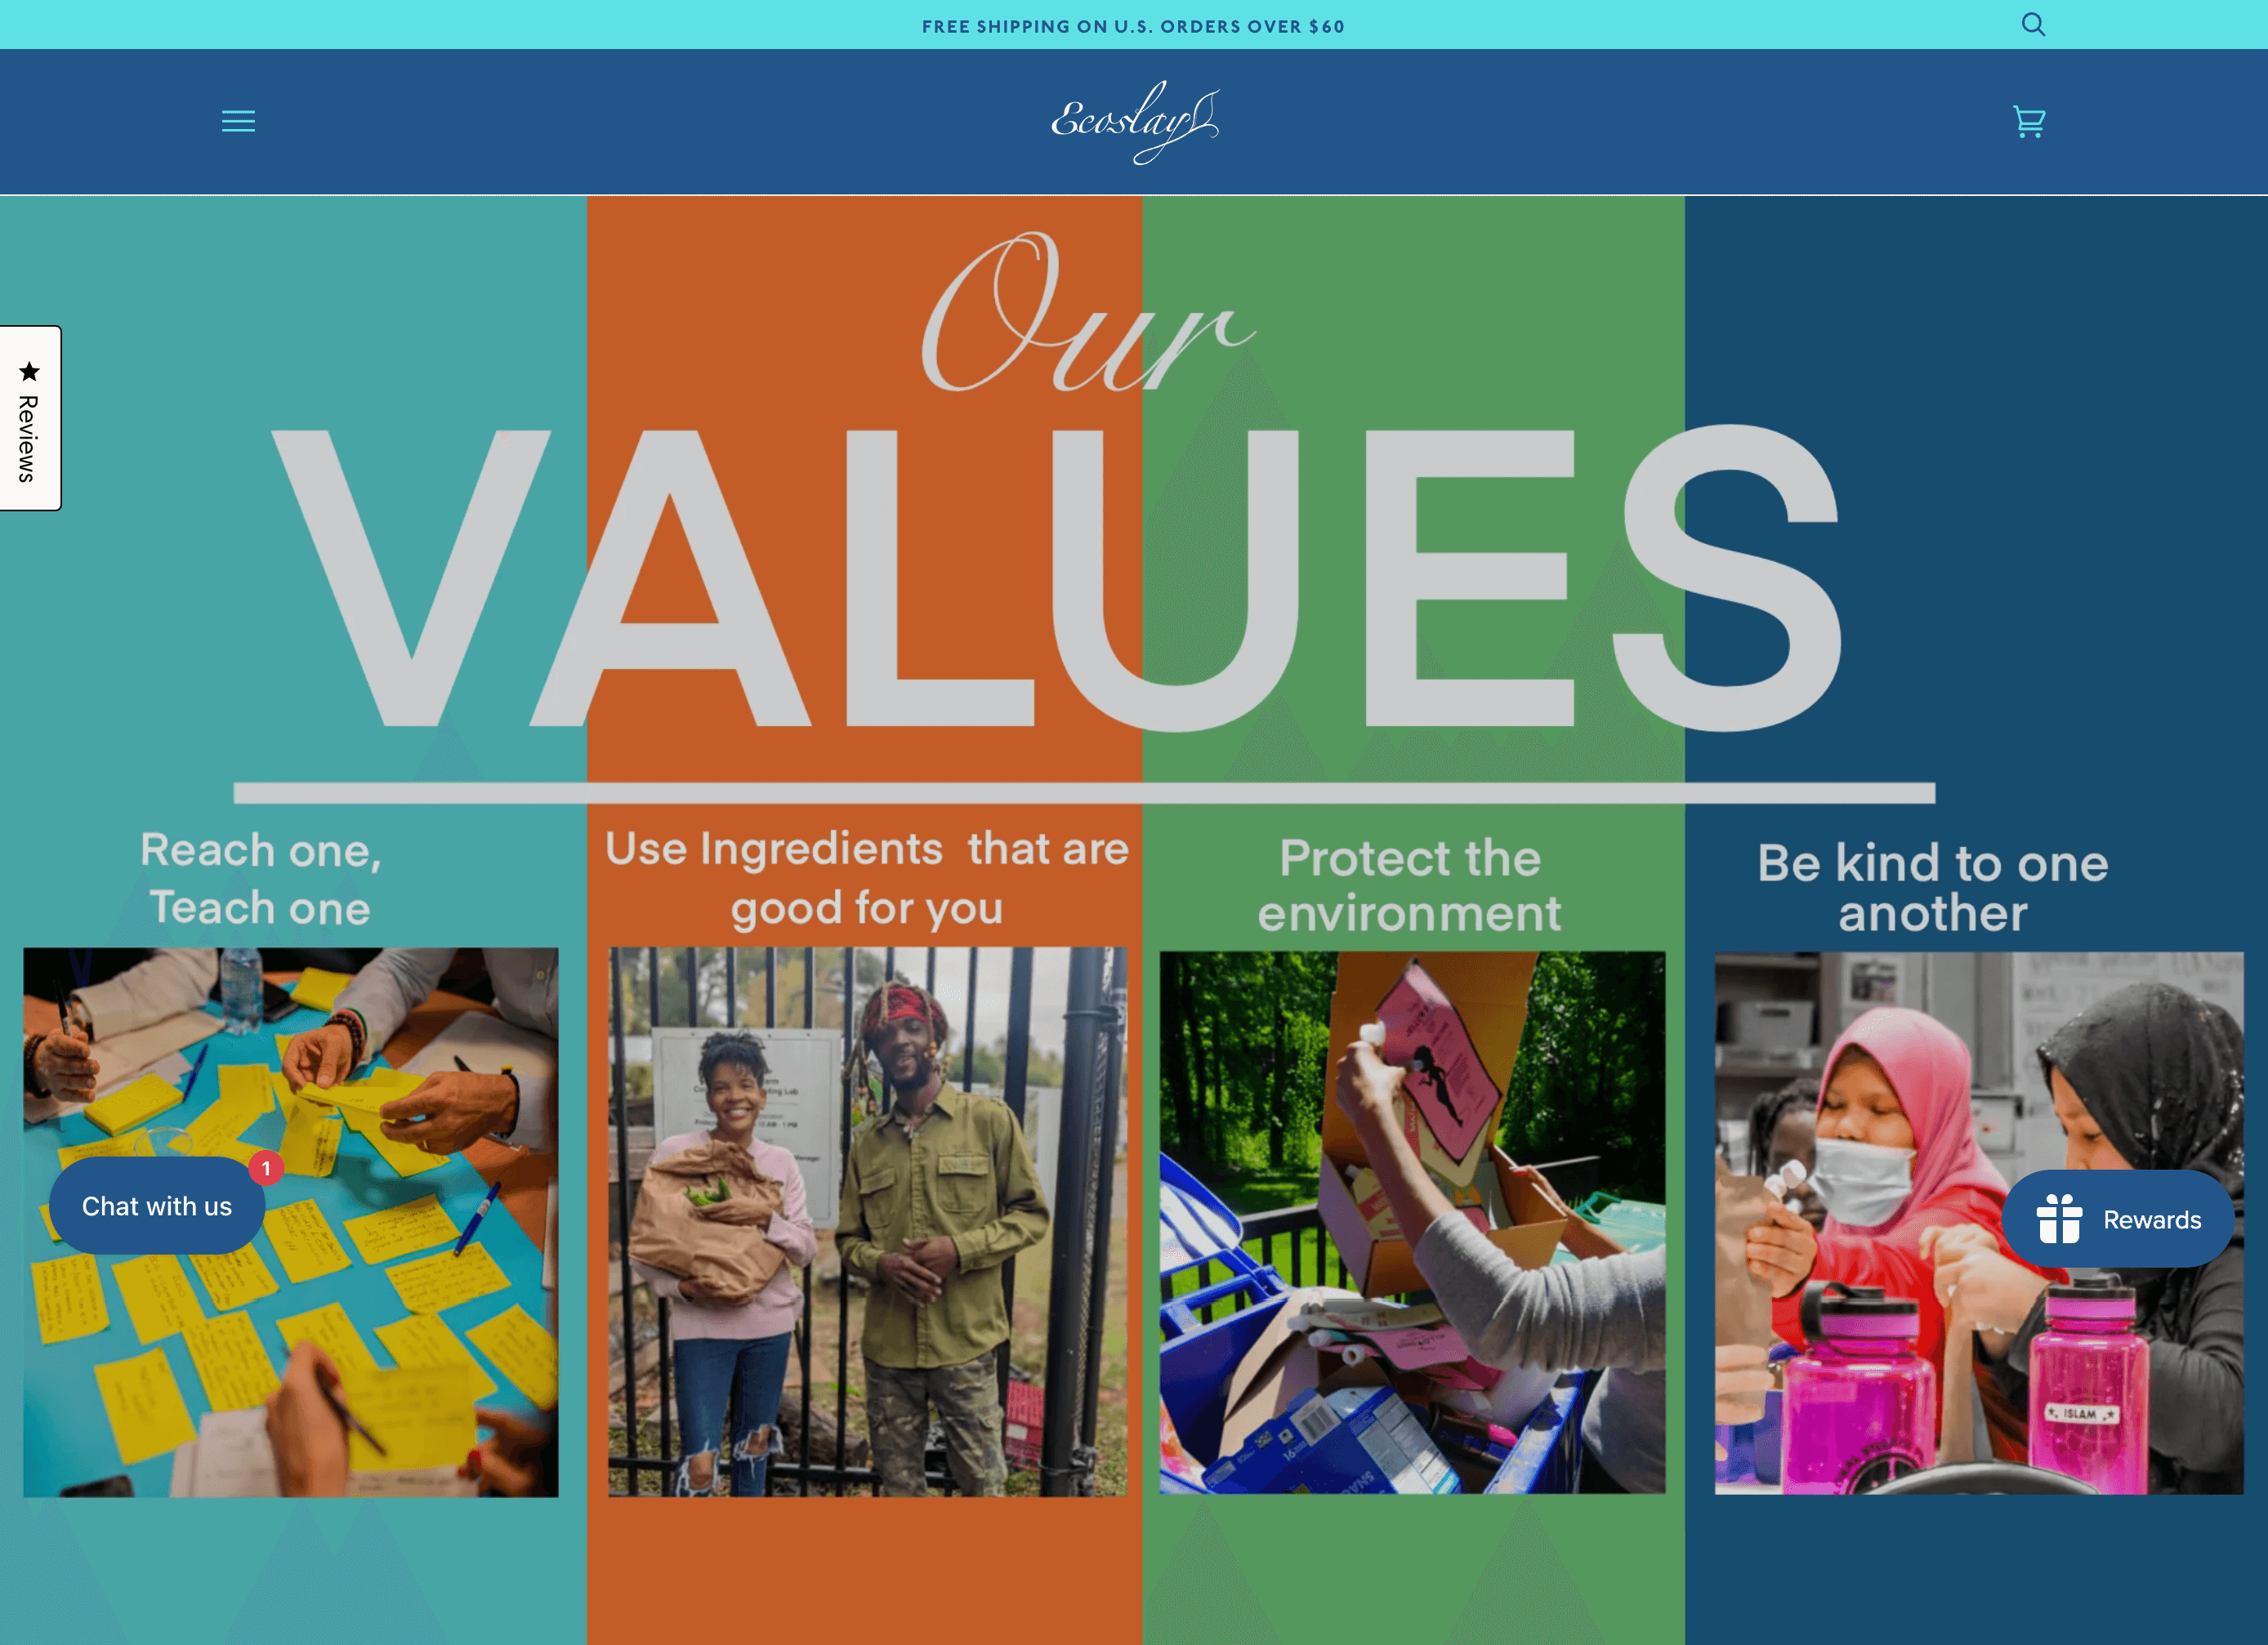 Sustainable brands–A screenshot of Ecoslay’s Values page showing the 4 main values behind the brand and a corresponding image for each: reach one, teach one, use ingredients that are good for you, protect the environment, and be kind to one another. 